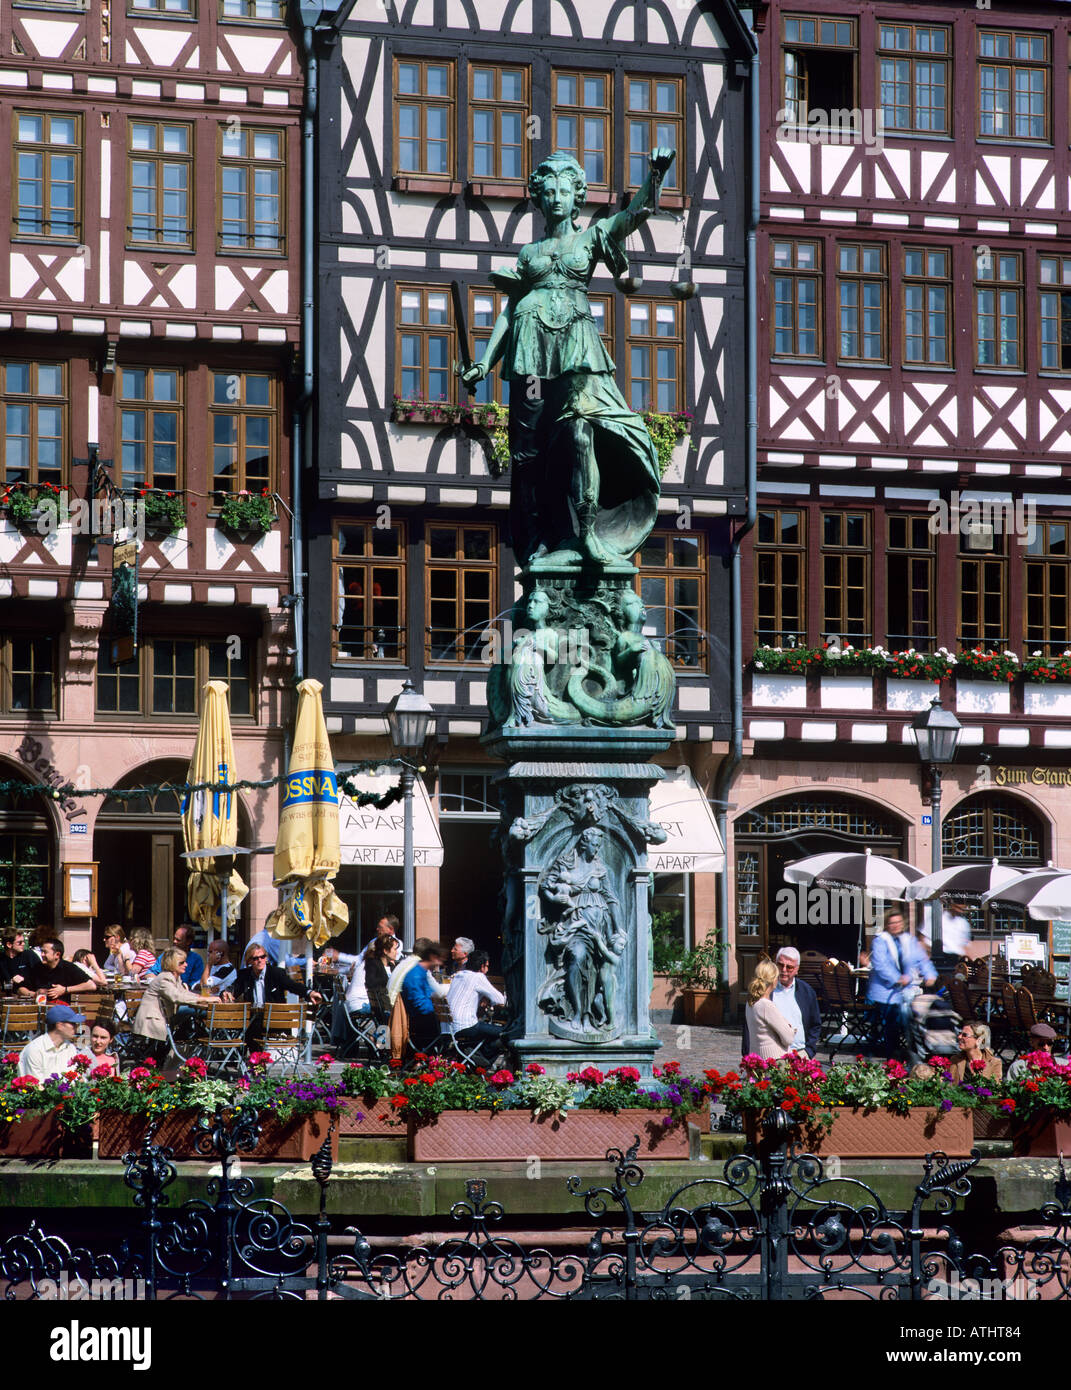 Reconstructed 'half-timbered' buildings and the Gerechtigkeitsbrunnen statue in Romerberg Square, Frankfurt am Main, Germany. Stock Photo